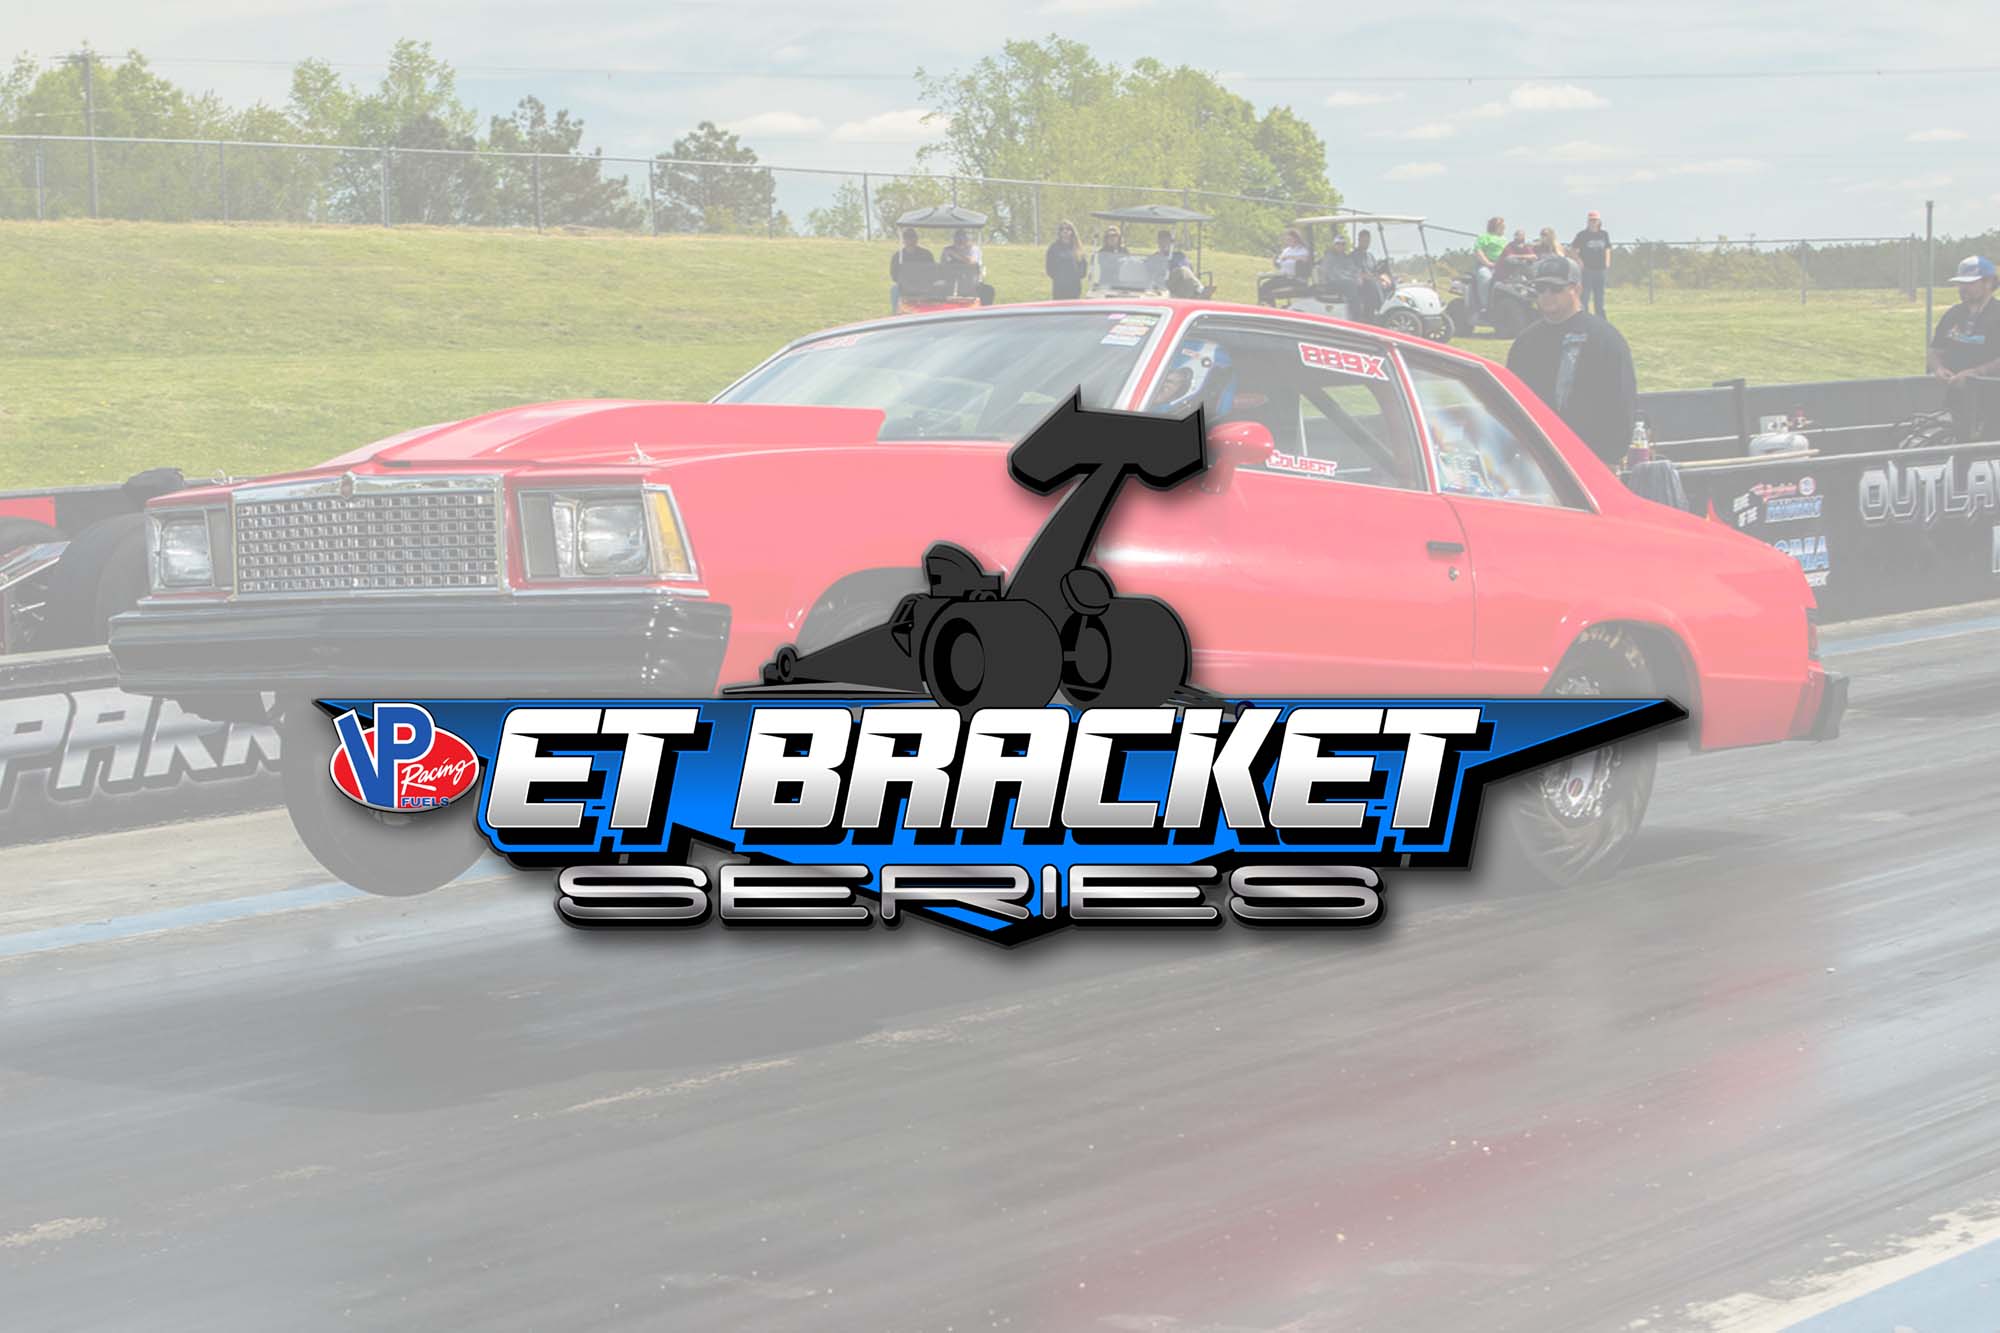 Taylor, Kirk, Marable and Shirkey Claim Victories at VP Fuels ET Bracket Series